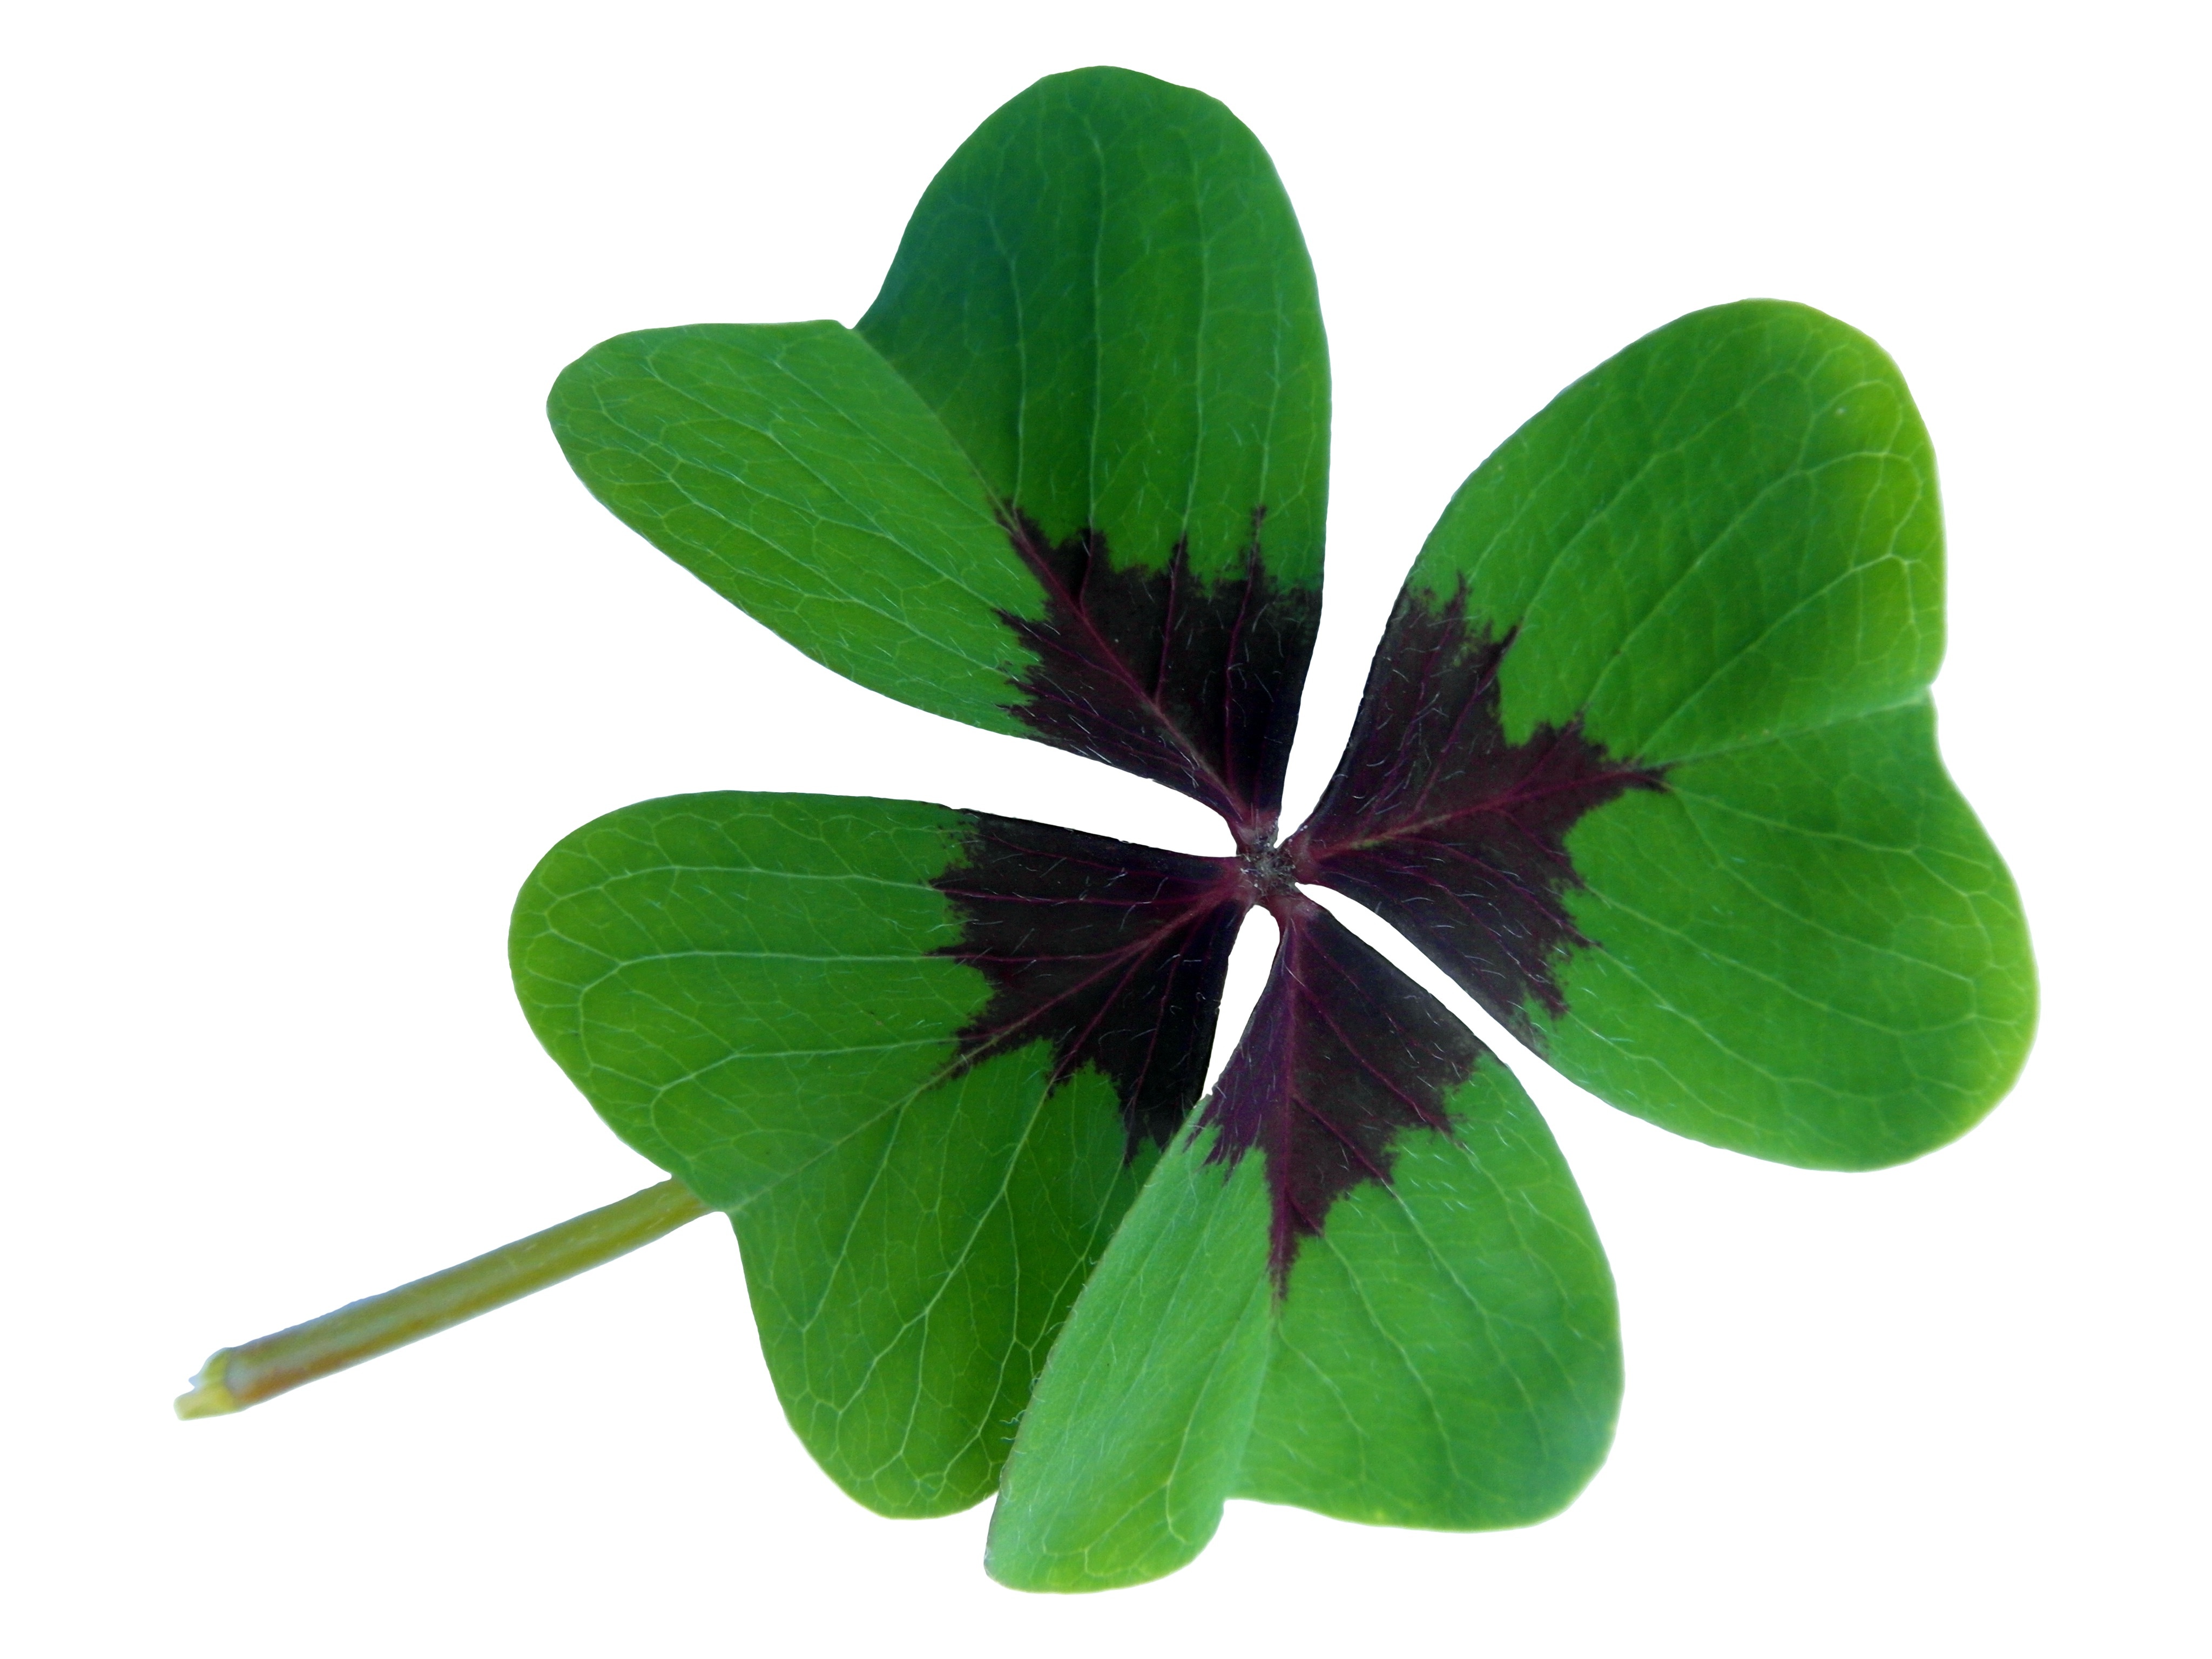 green and purple clover leaf